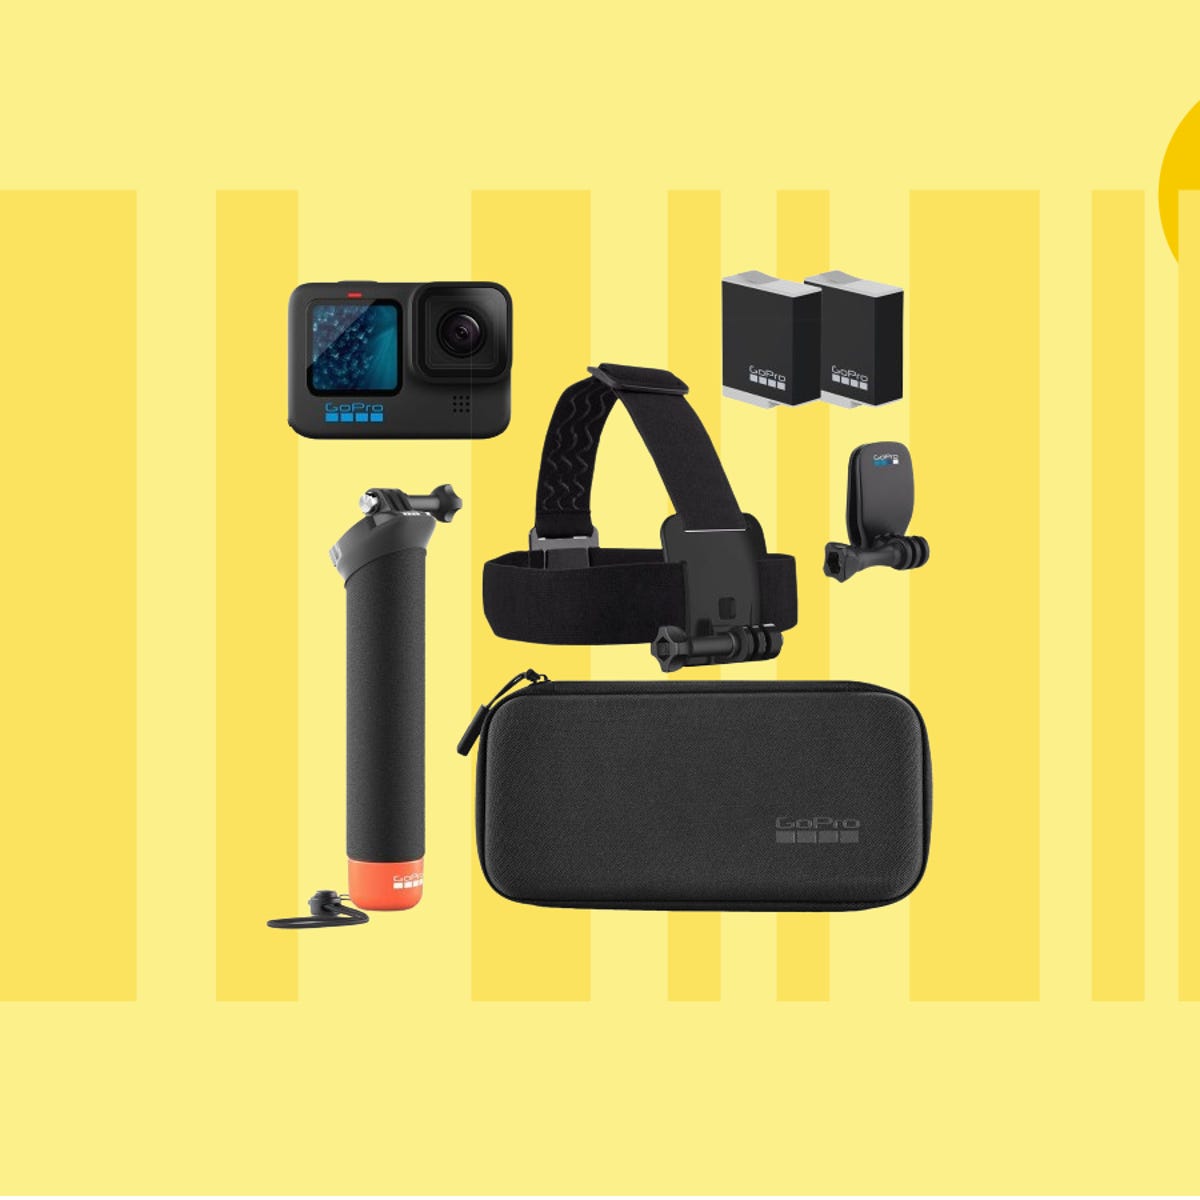 Save $100 on This GoPro Bundle With All the Gear You Need for Your Next  Shoot - CNET